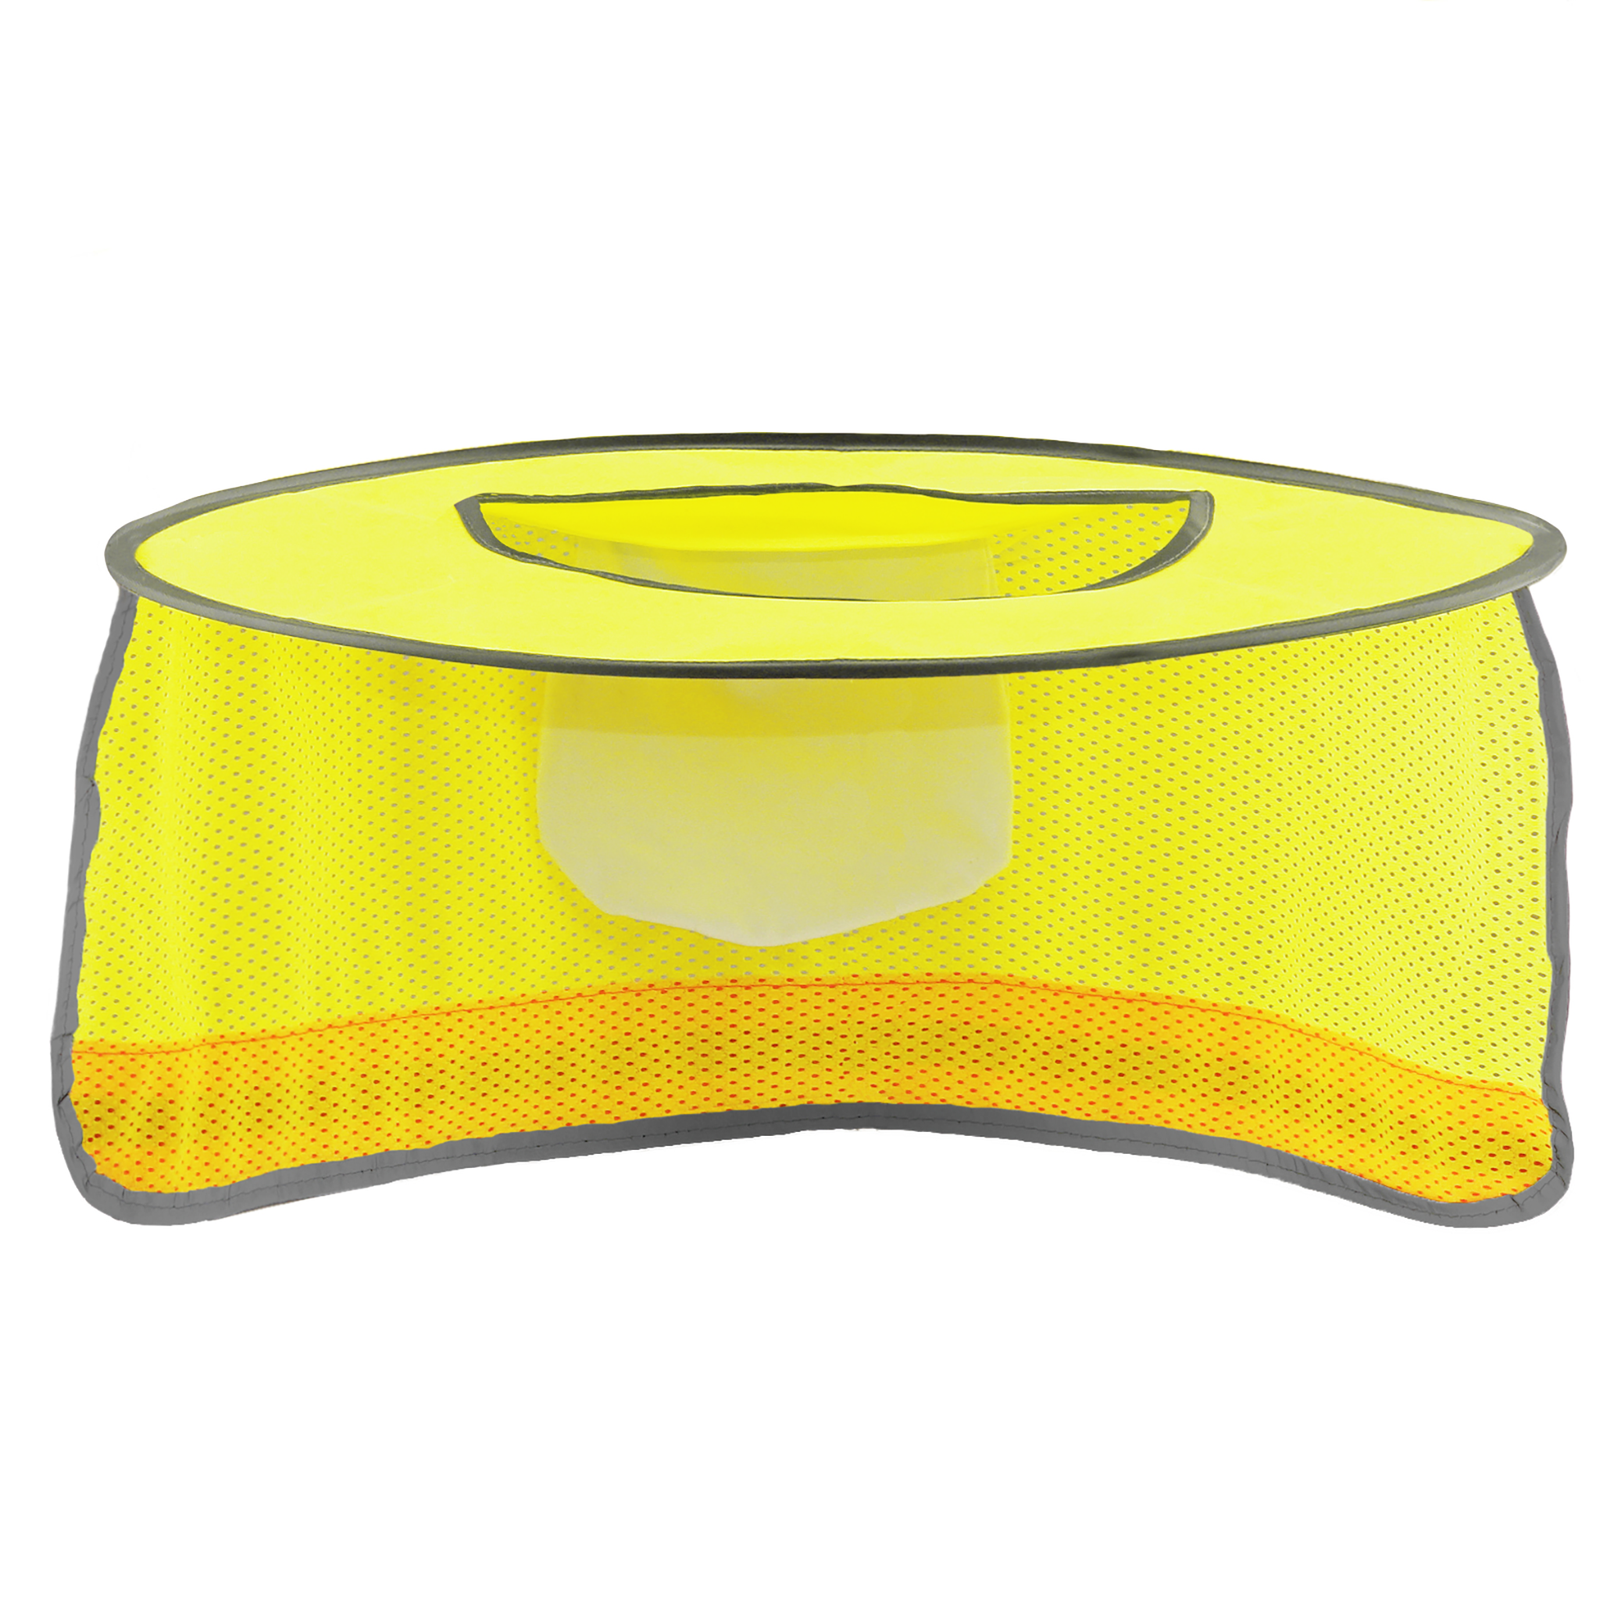 yellow sunshield accessory for cap style hard hat 